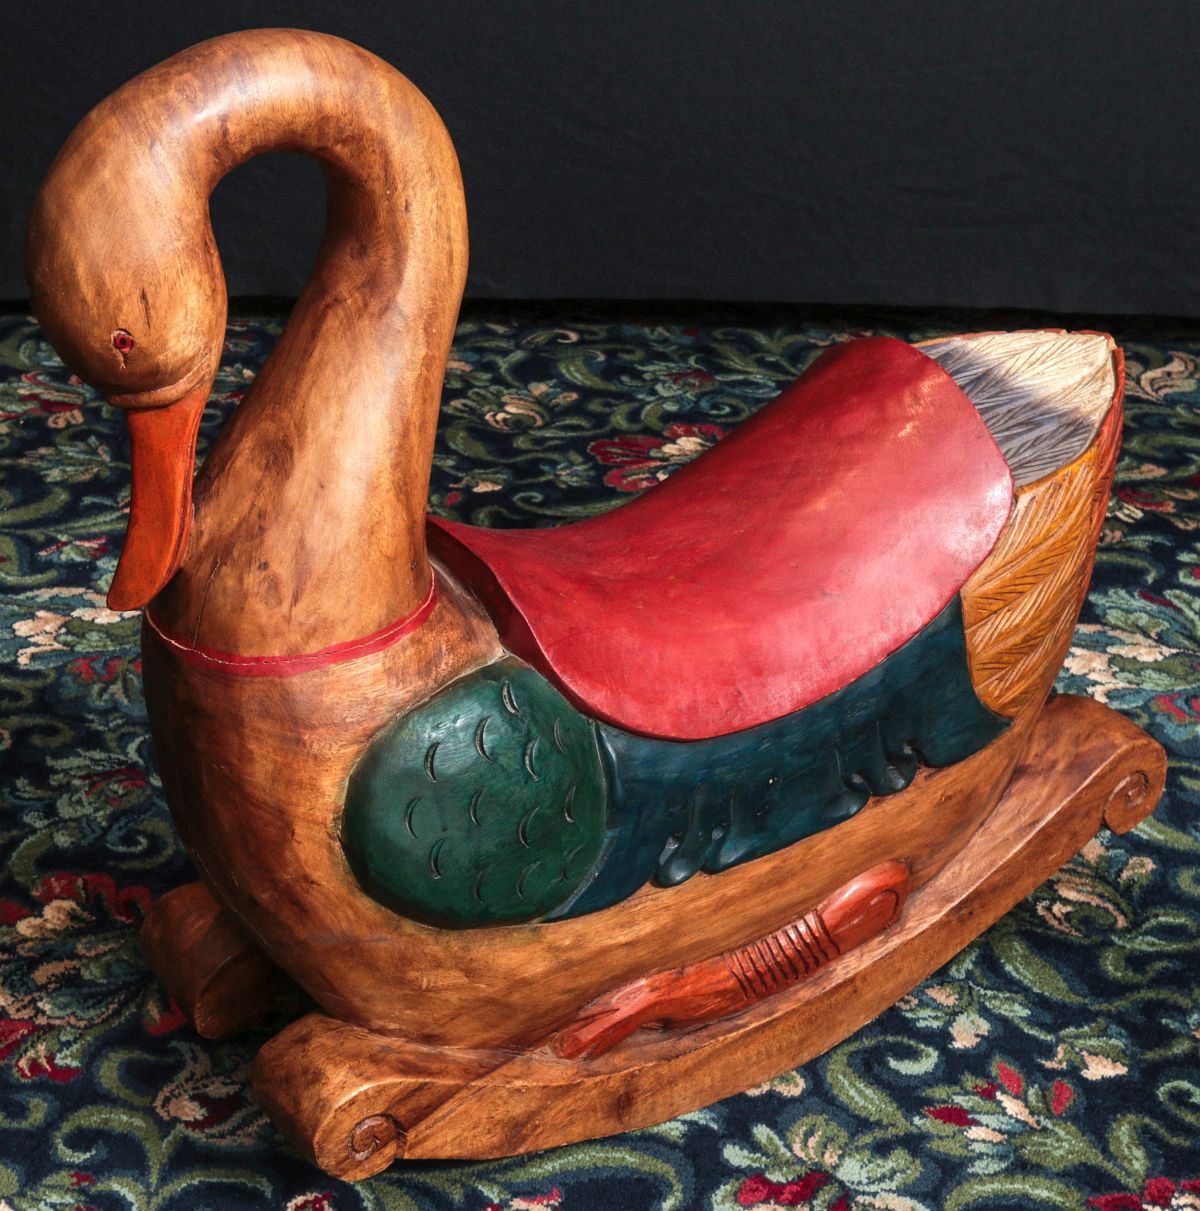 A CARVED AND PAINTED CHILD'S ROCKING RIDE-ON TOY